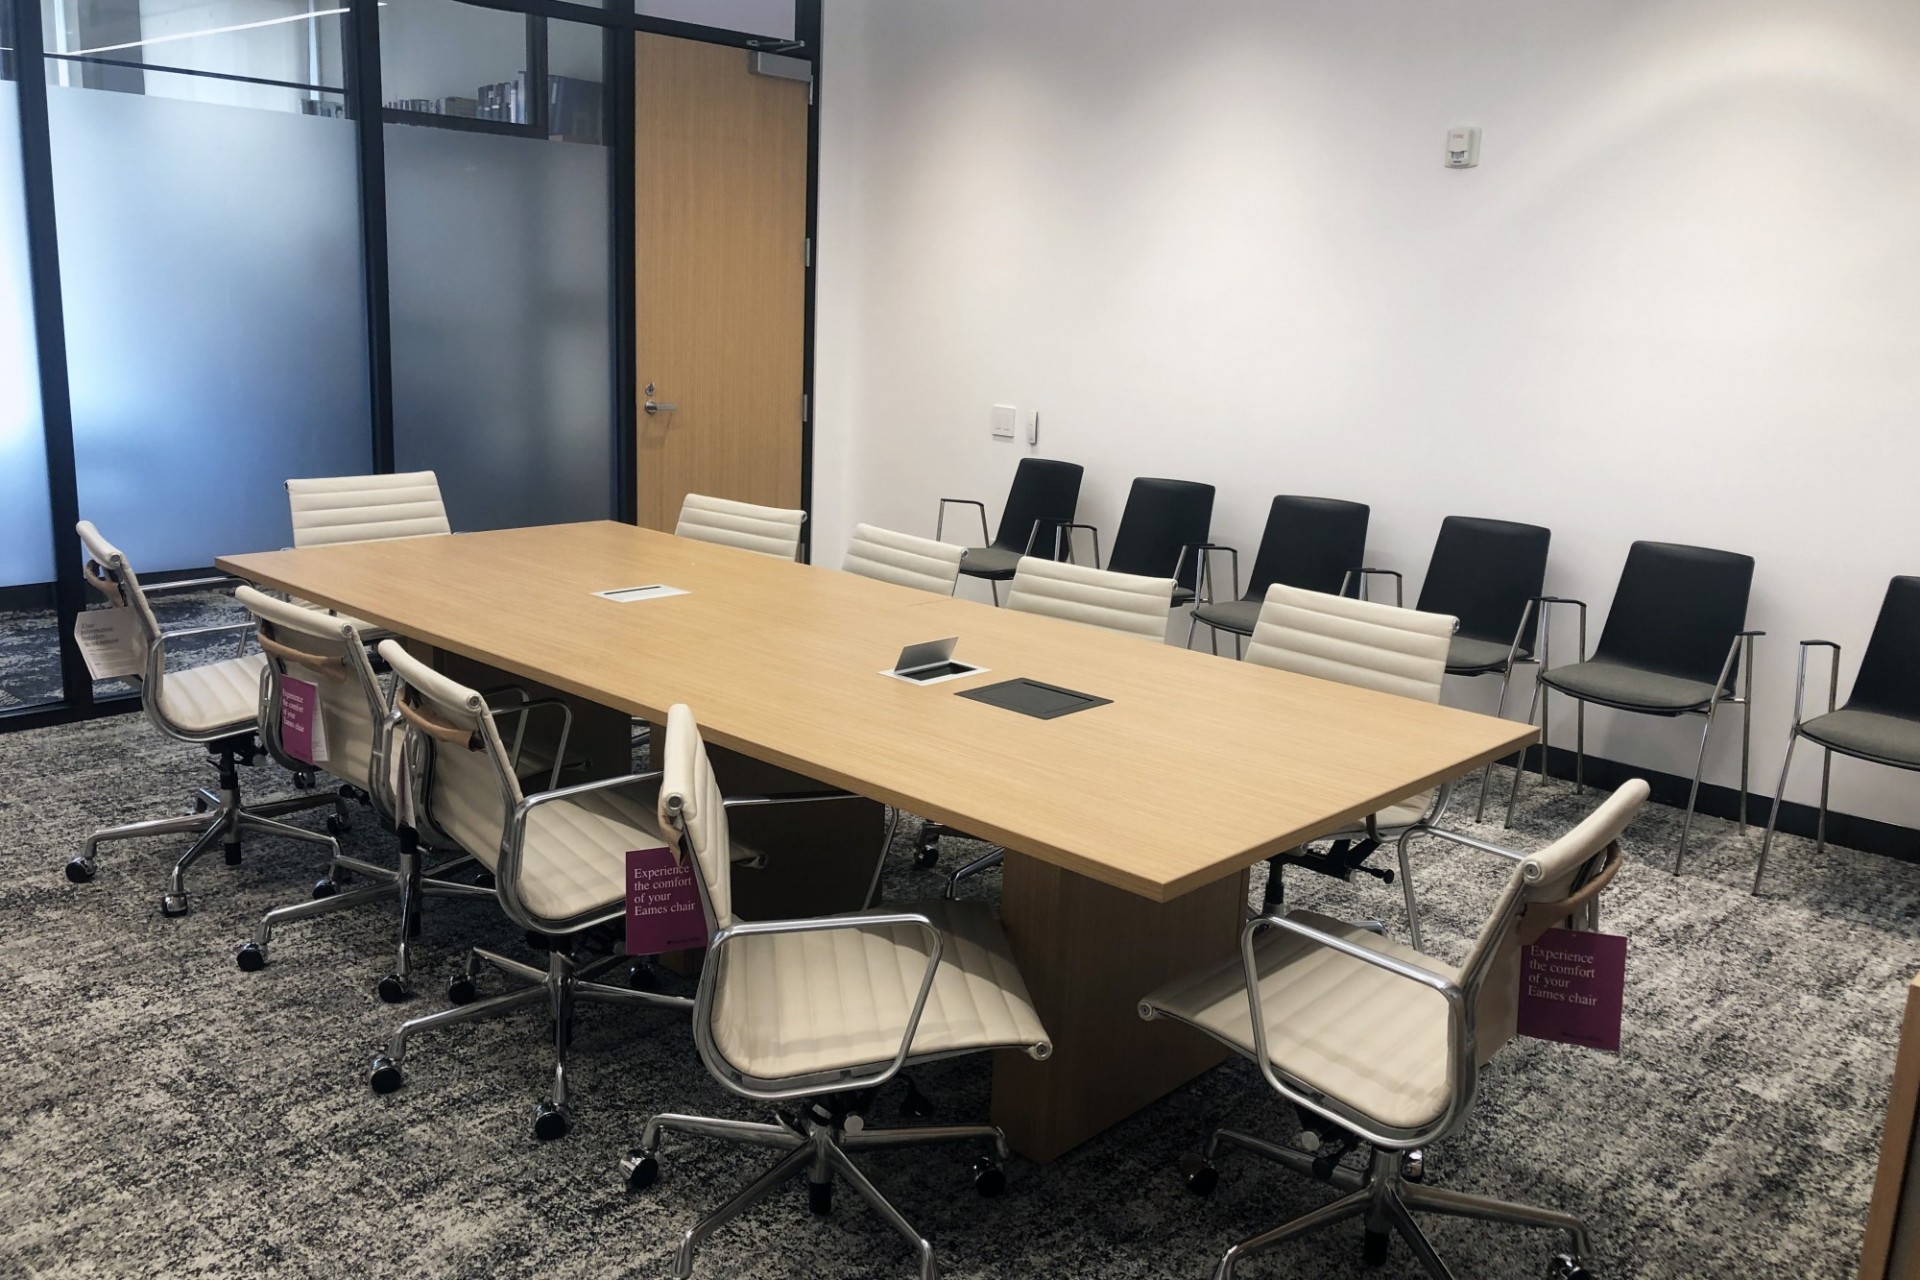 A renovated conference room with new carpeting, a new conference table, and seating around the table and lined up against the wall.